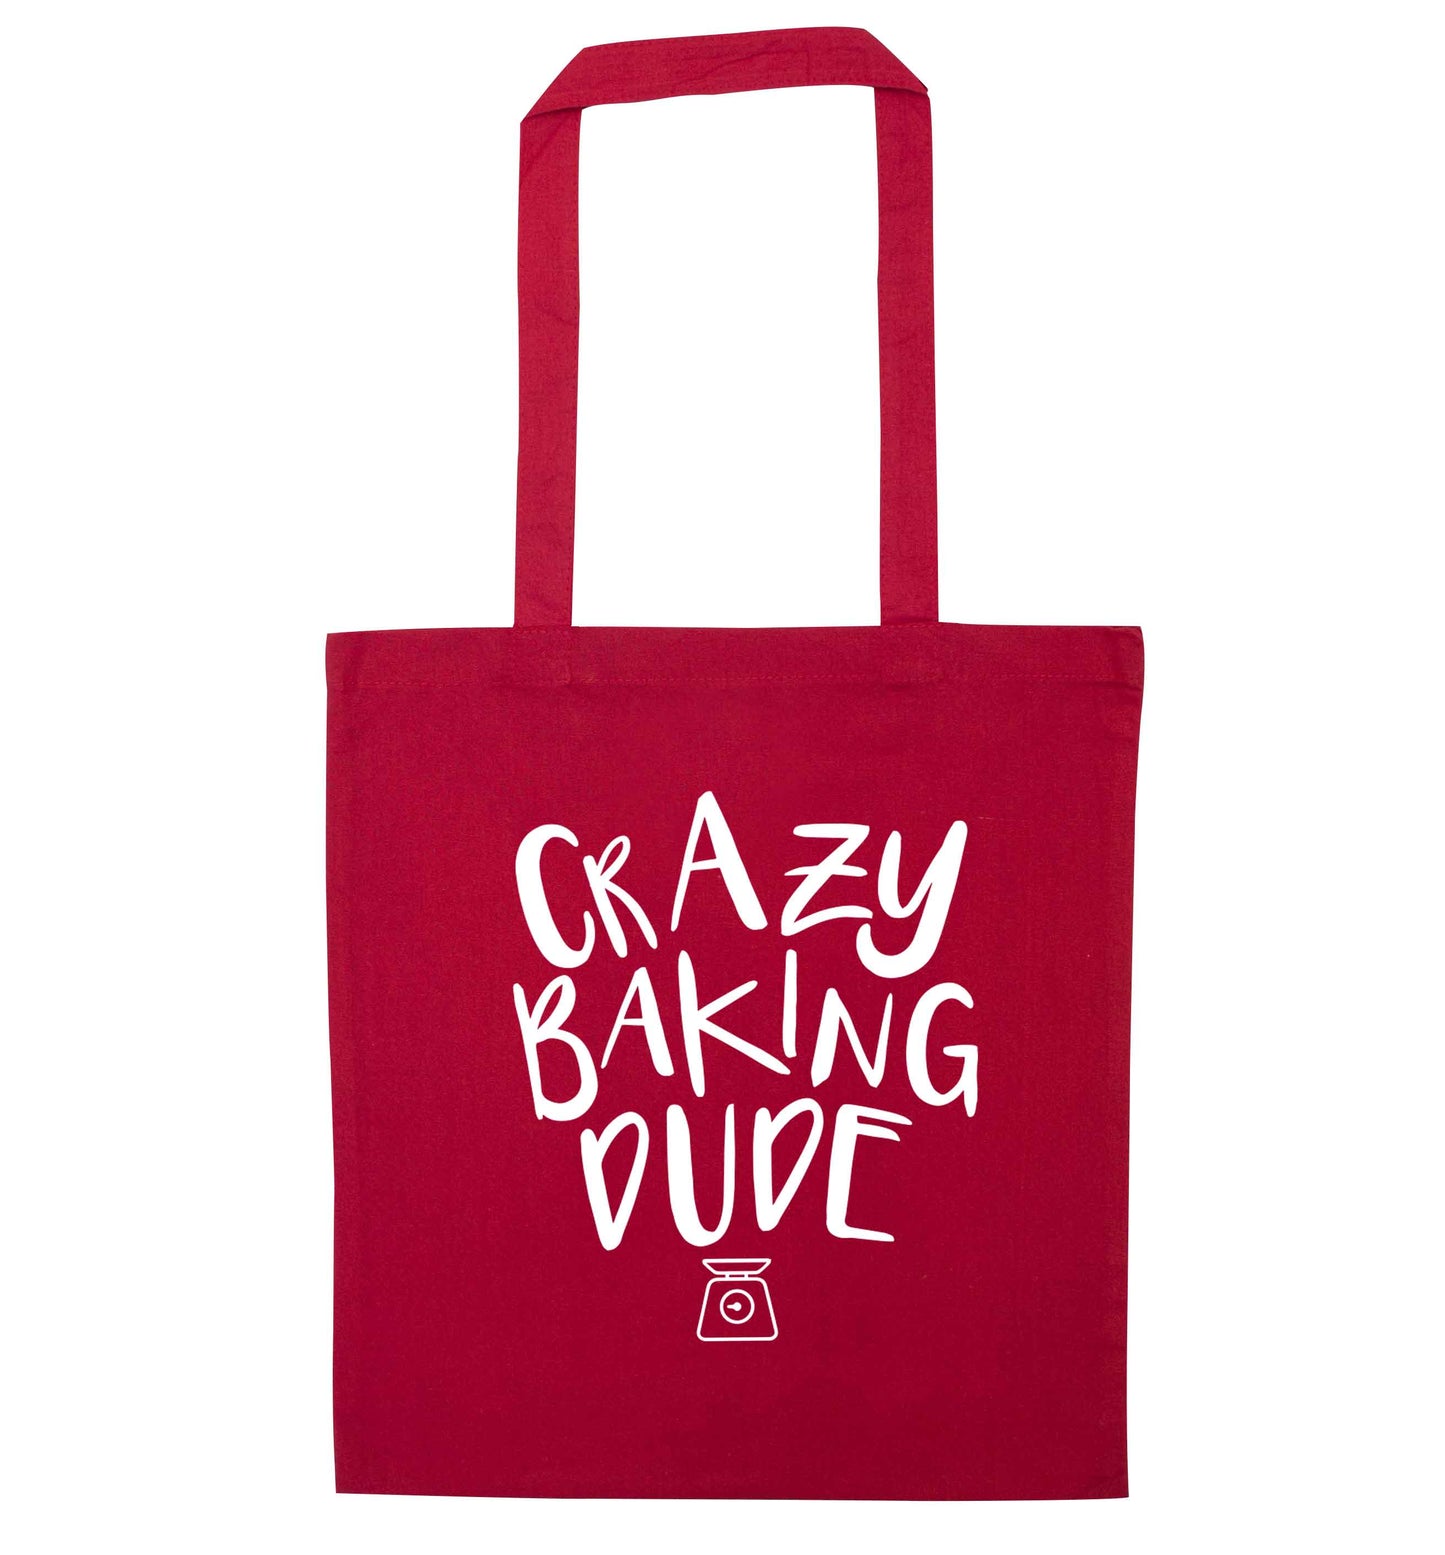 Crazy baking dude red tote bag